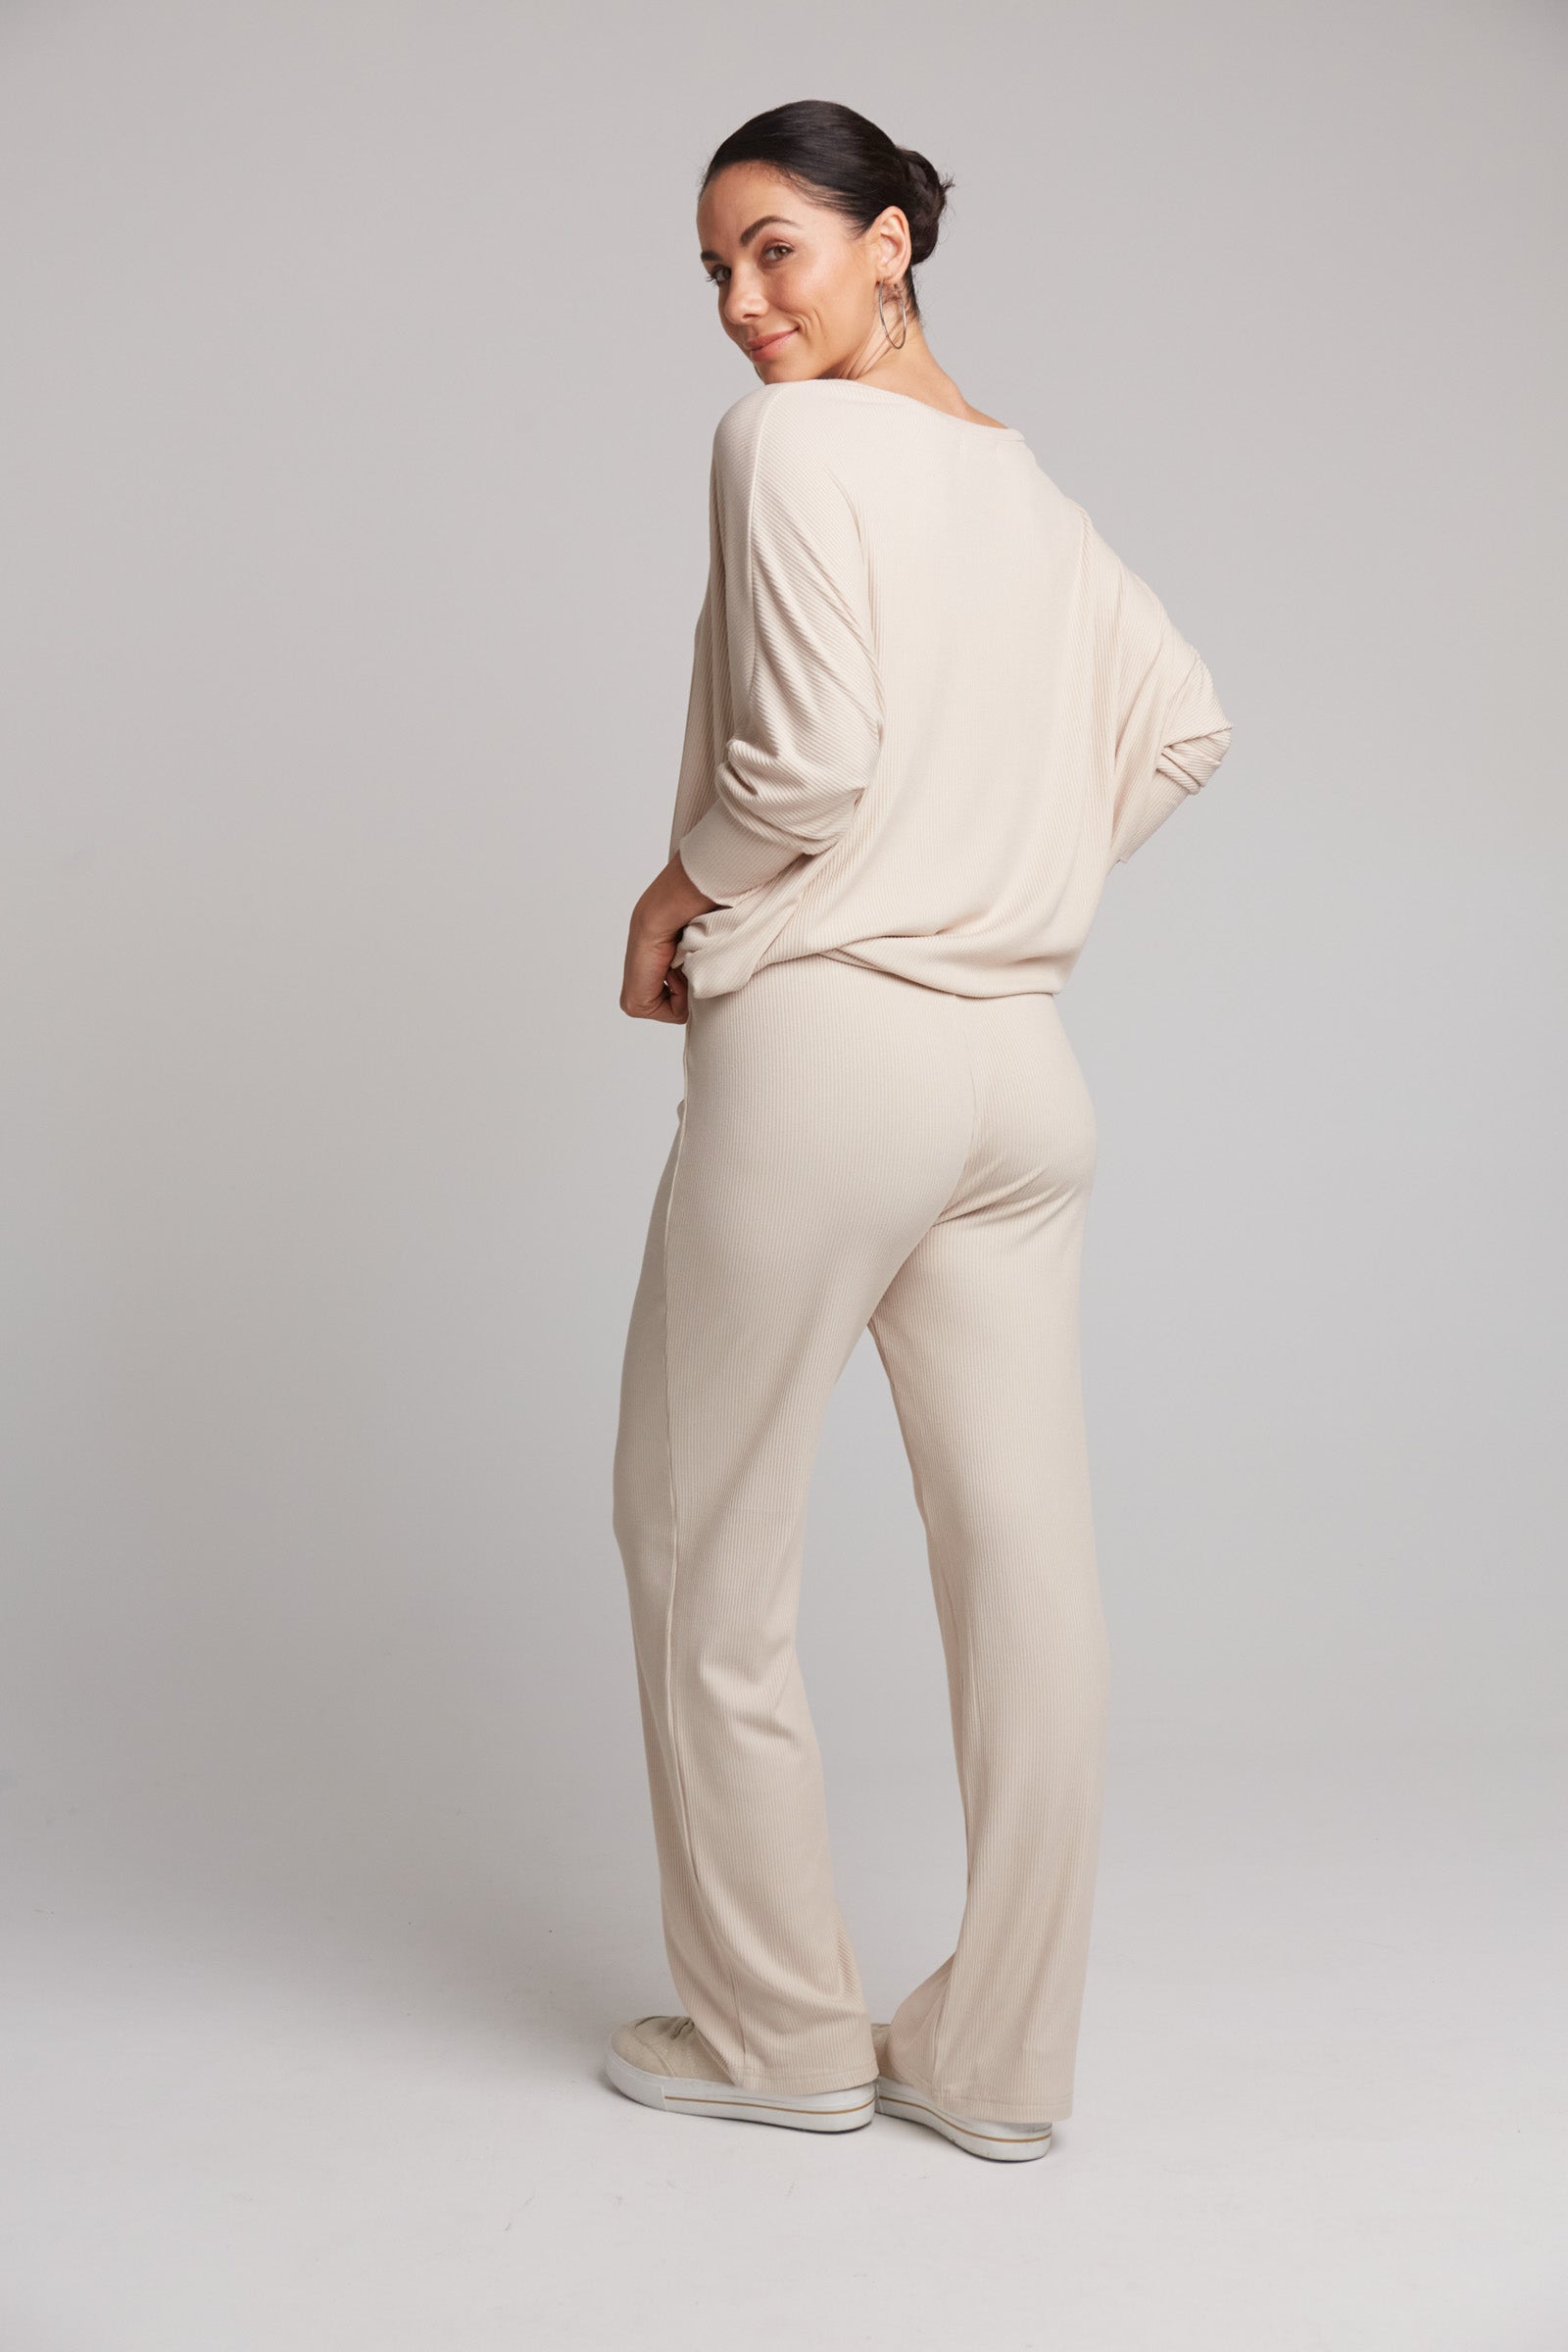 Studio Jersey Pant - Tusk - eb&ive Clothing - Pant Relaxed Jersey